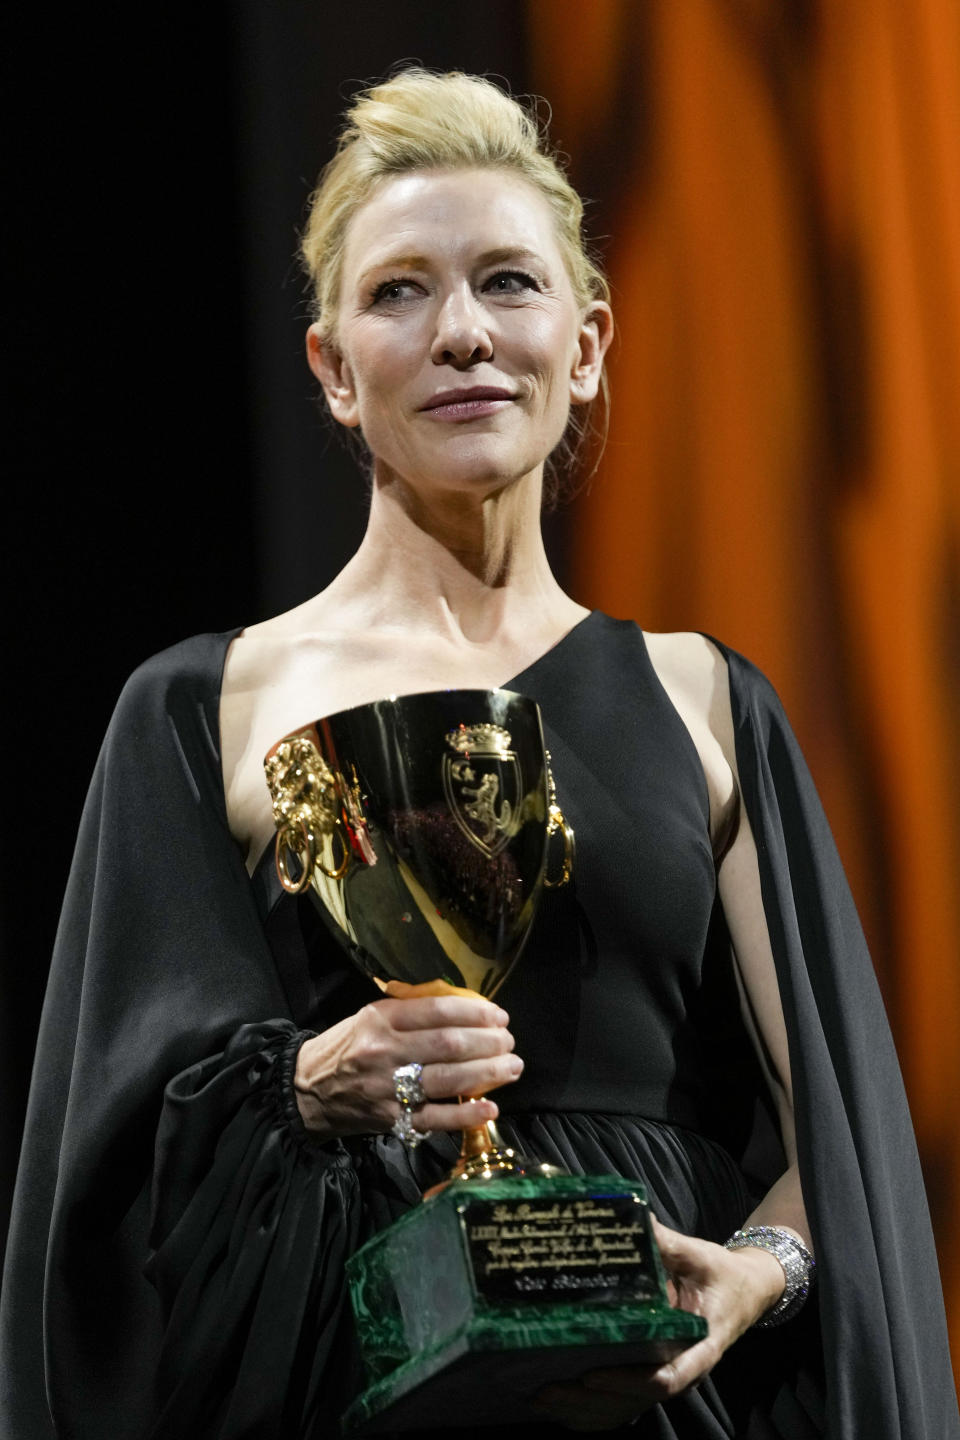 Cate Blanchett holds the Coppa Volpi award for best actress for the film 'Tar' at the closing ceremony of the 79th edition of the Venice Film Festival in Venice, Italy, Saturday, Sept. 10, 2022. (AP Photo/Domenico Stinellis)